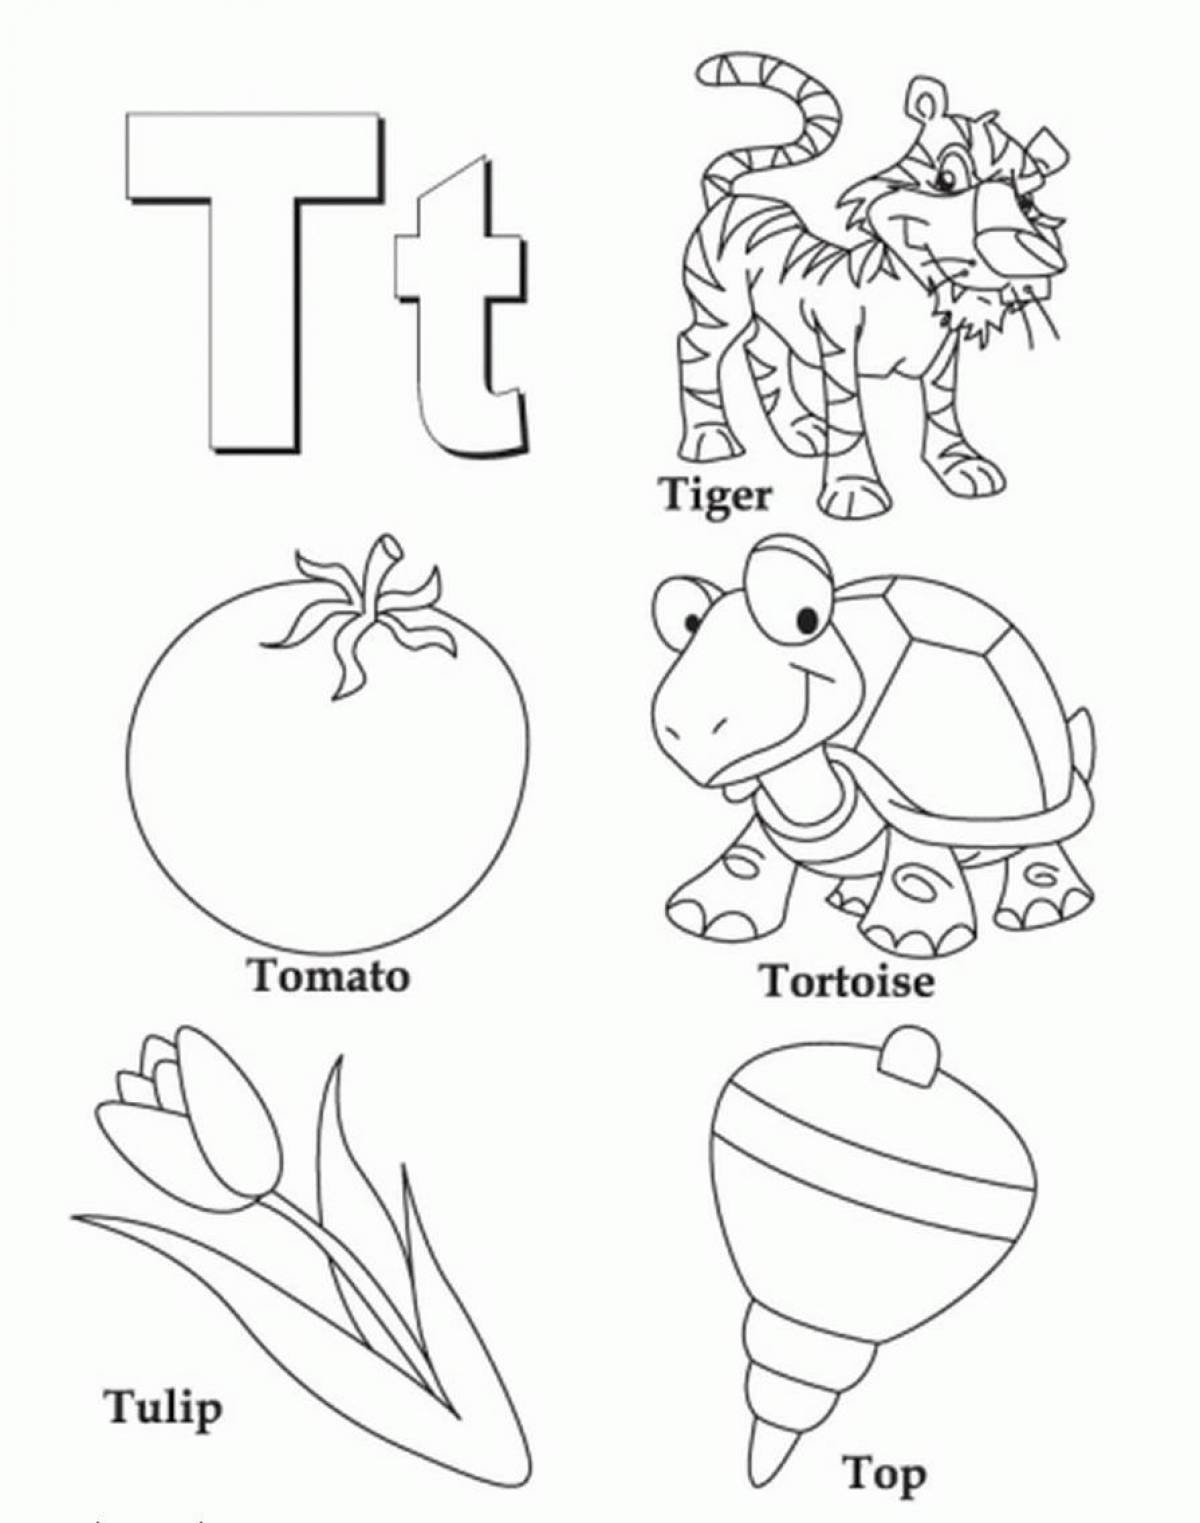 Colorful english alphabet coloring page for kids of all abilities